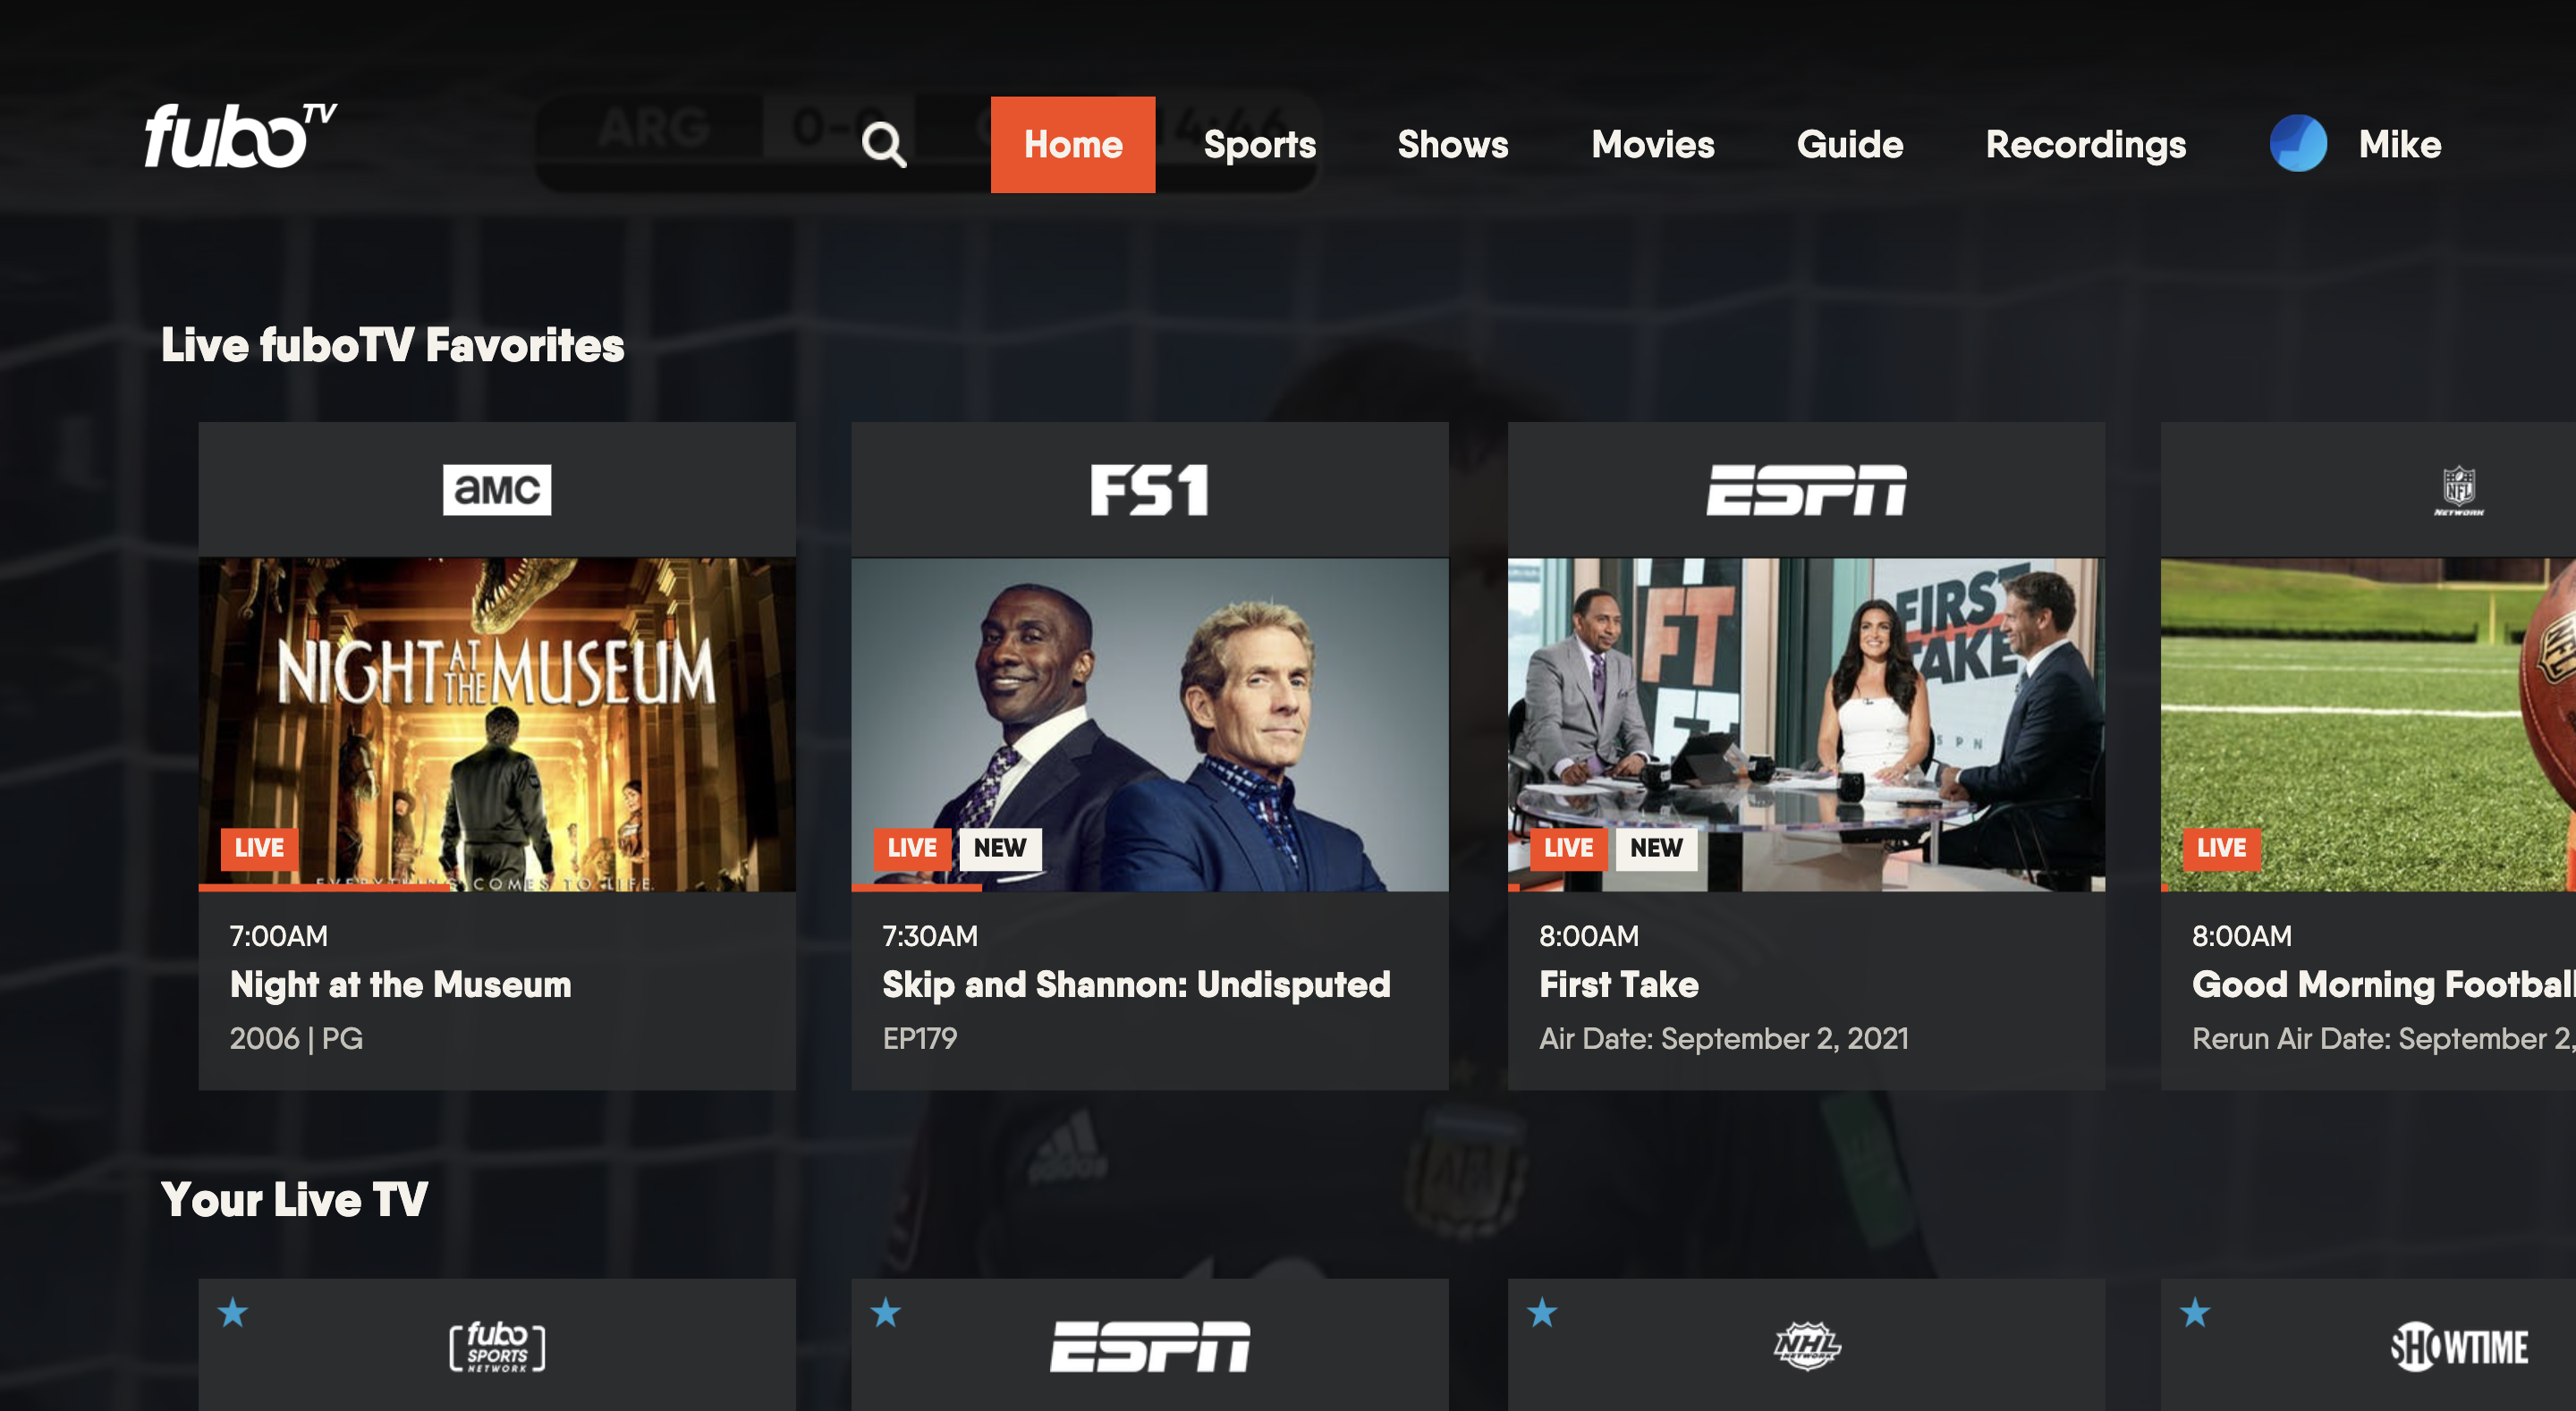 HOME screen of the FuboTV app on Xbox